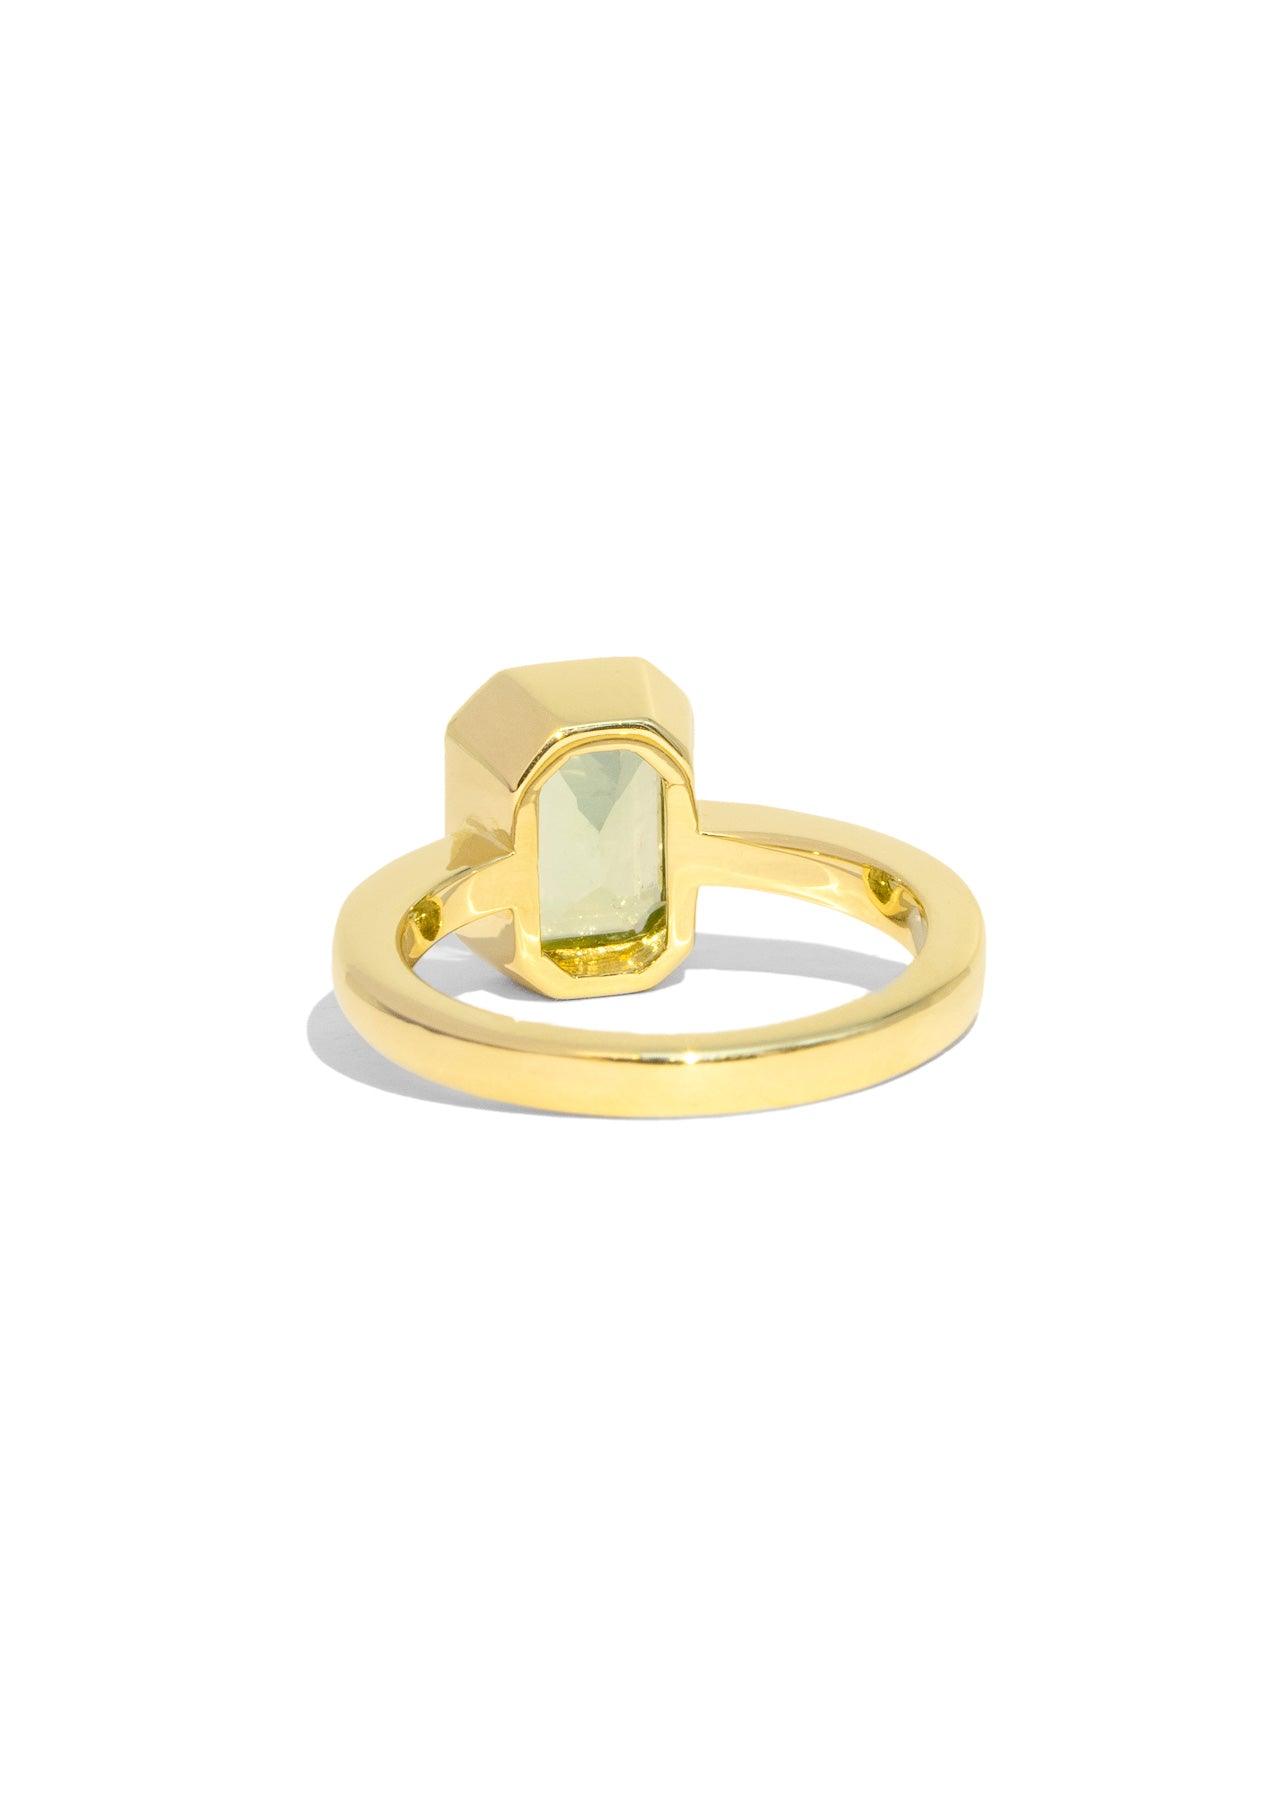 The Isabel 2.6ct Moss Tourmaline Ring - Molten Store